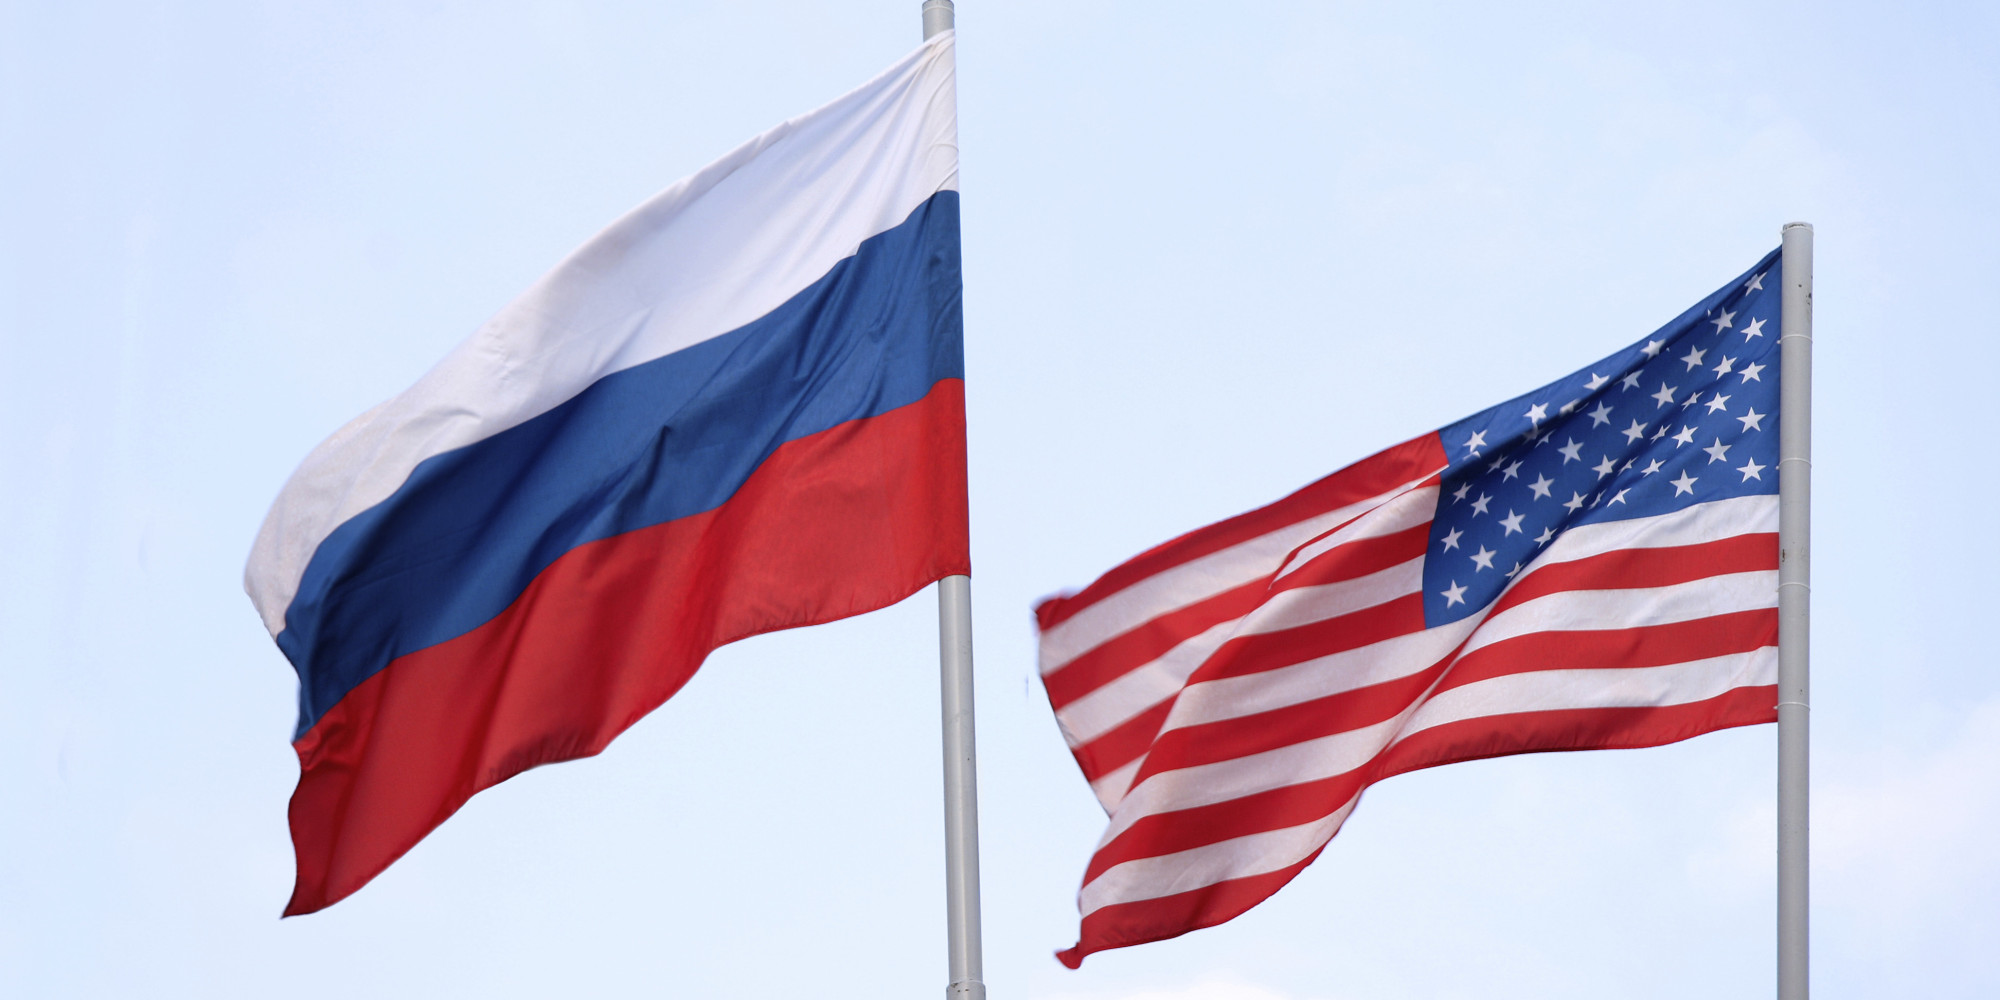 Flags of Russia and US